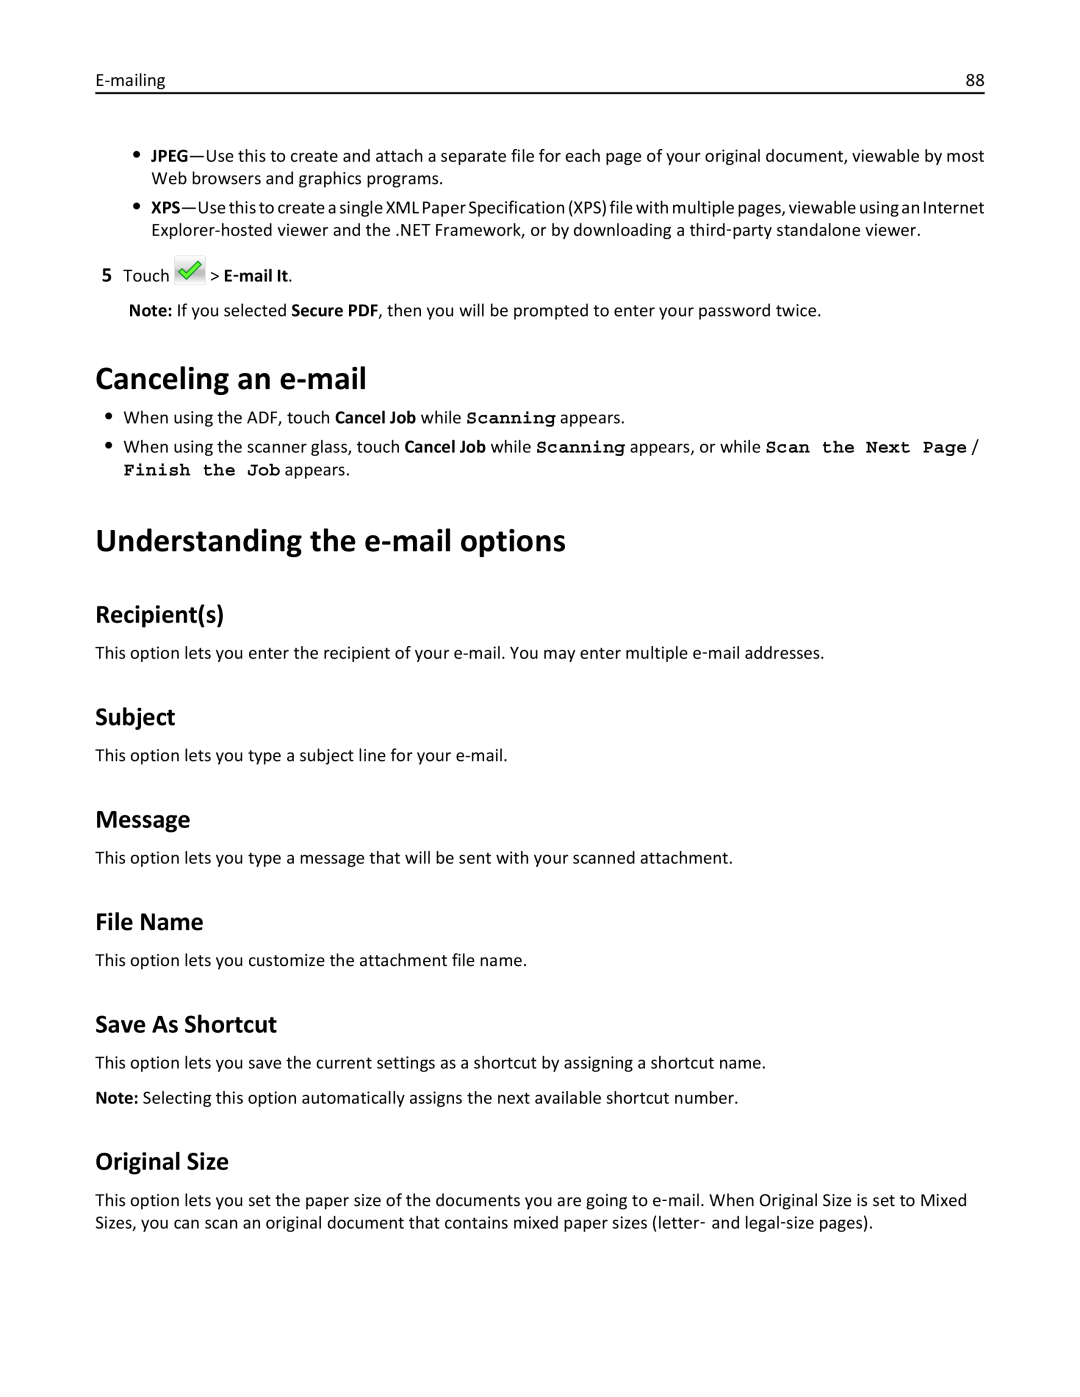 Lexmark 436 Canceling an e-mail, Understanding the e-mail options, Recipients, Subject, Message, File Name, Original Size 